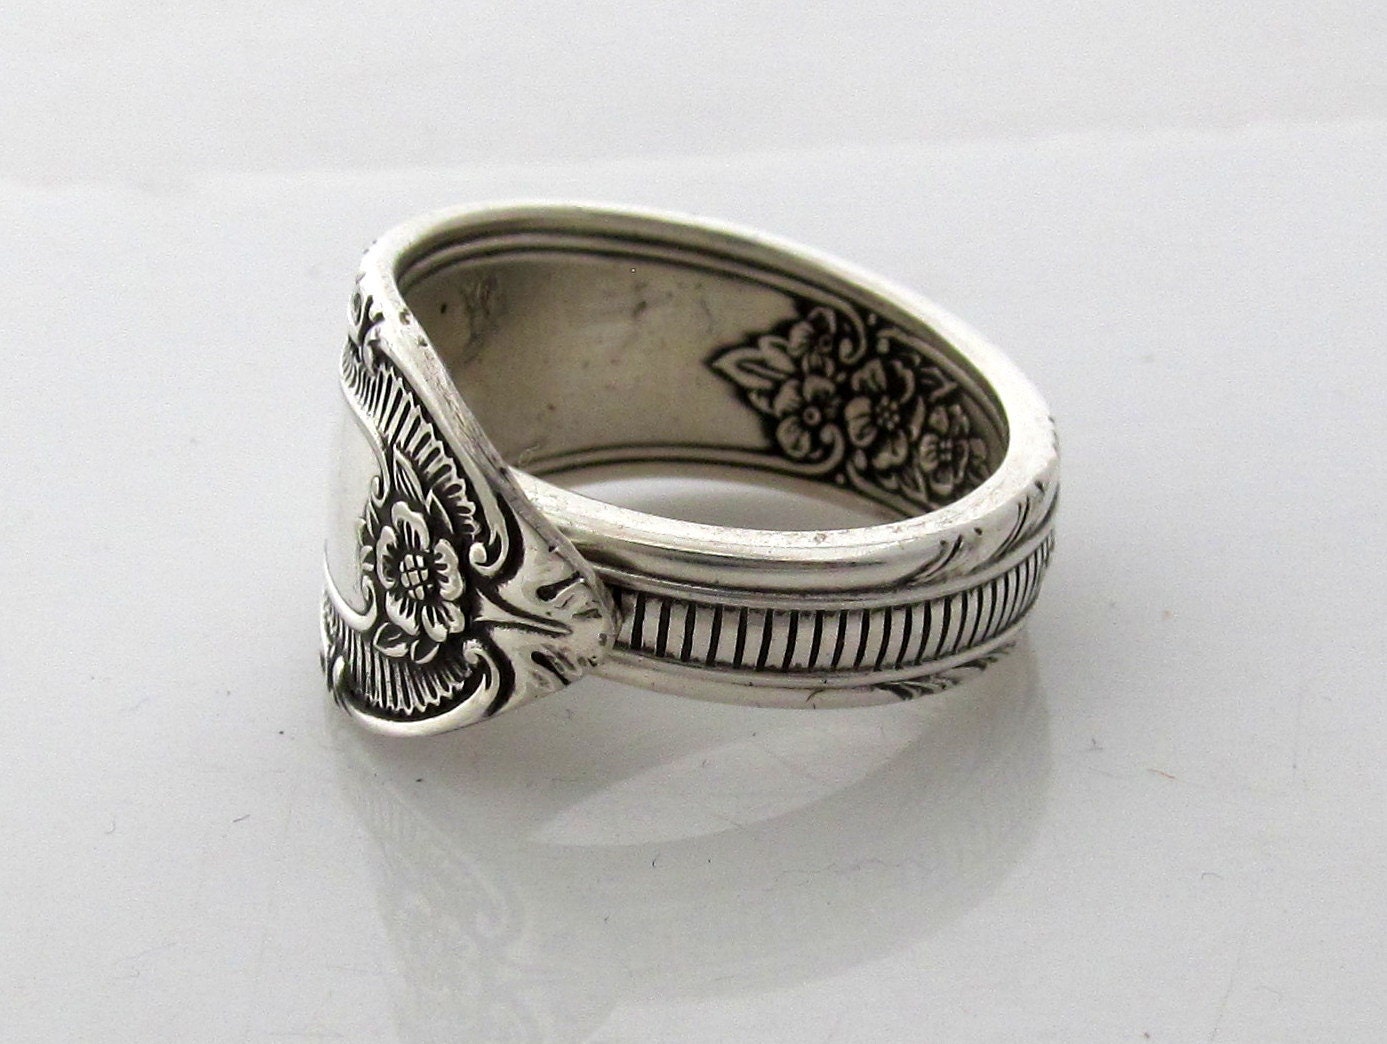 Silver Spoon Ring Cotillion Silverware Pattern Size 3 4 5 6 7 - Etsy